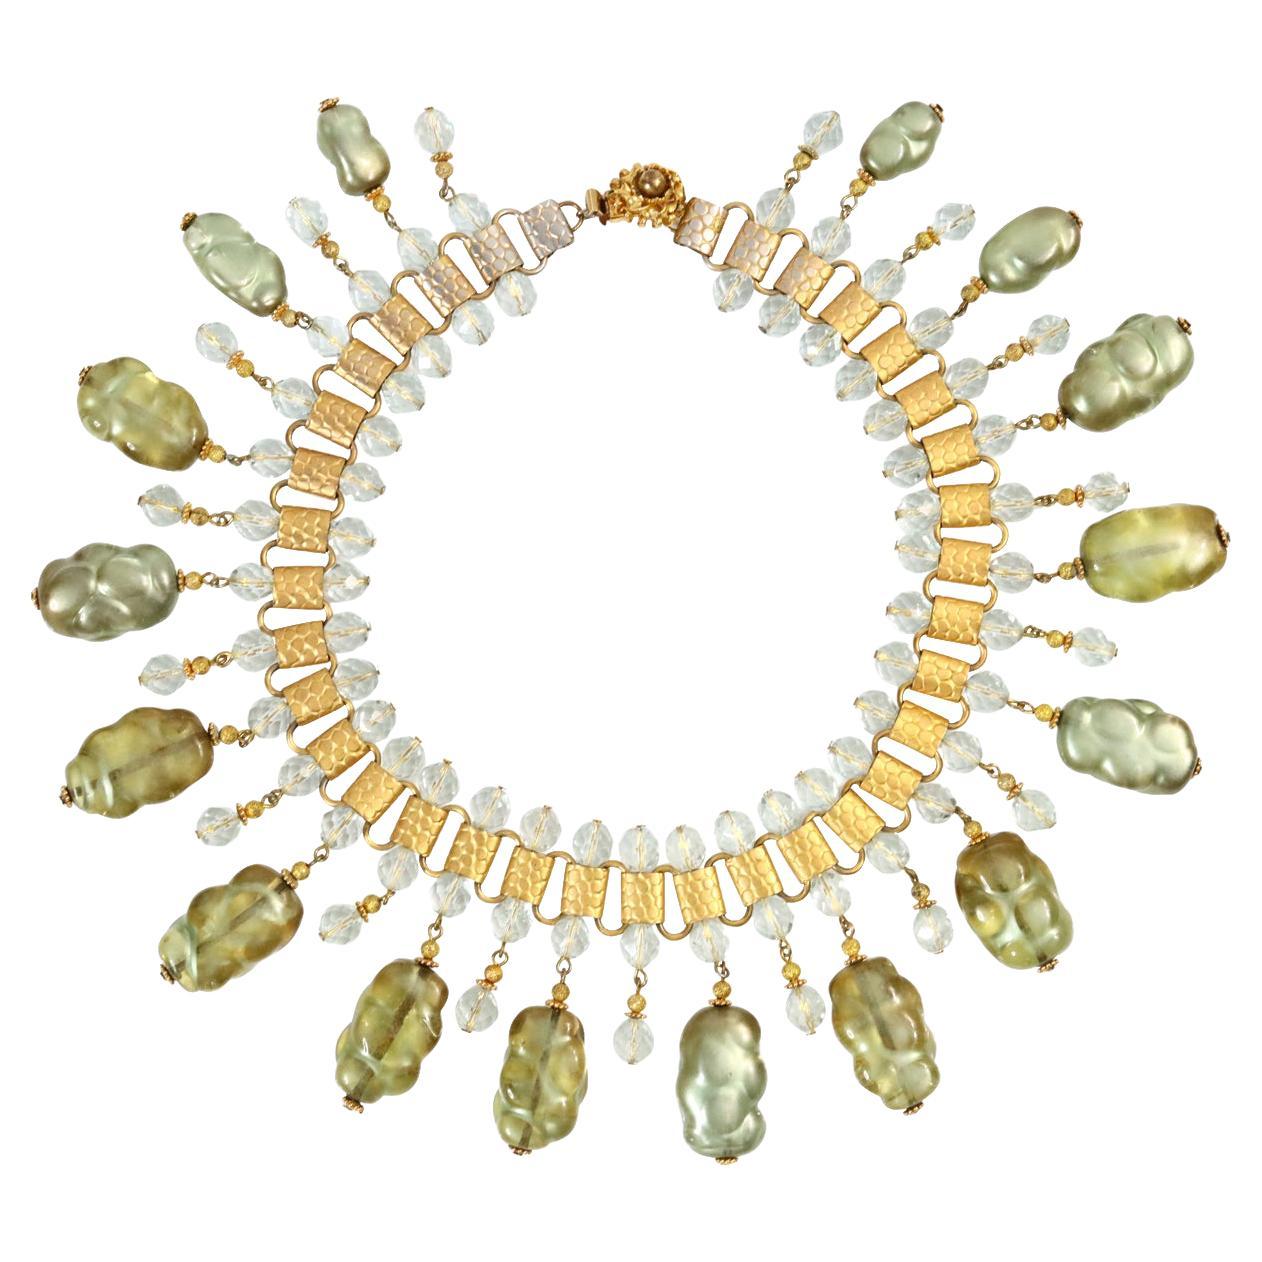 Vintage deLillo Gold Tone with Light Green Dangling Beads Necklace Circa 1970's.  This is so special.  The bigger beads are a mottled light green citrine with a gold piece to finish at the bottom.  There is a lighter bead in between each large bead